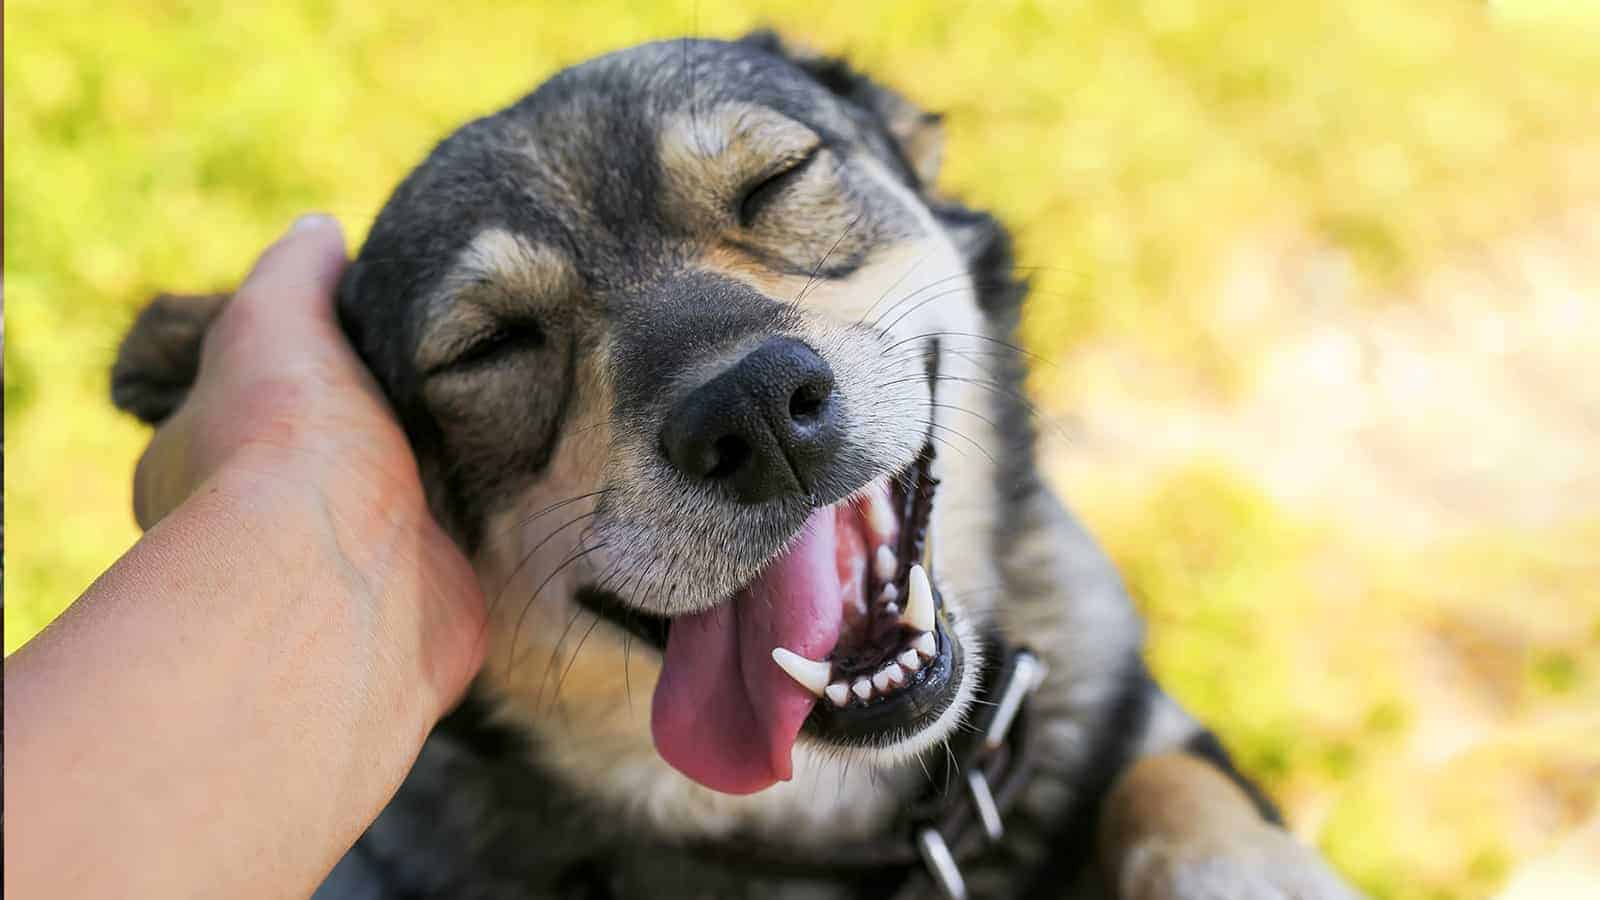 Researchers Reveal Petting Dogs Proven to Decrease Stress and Anxiety